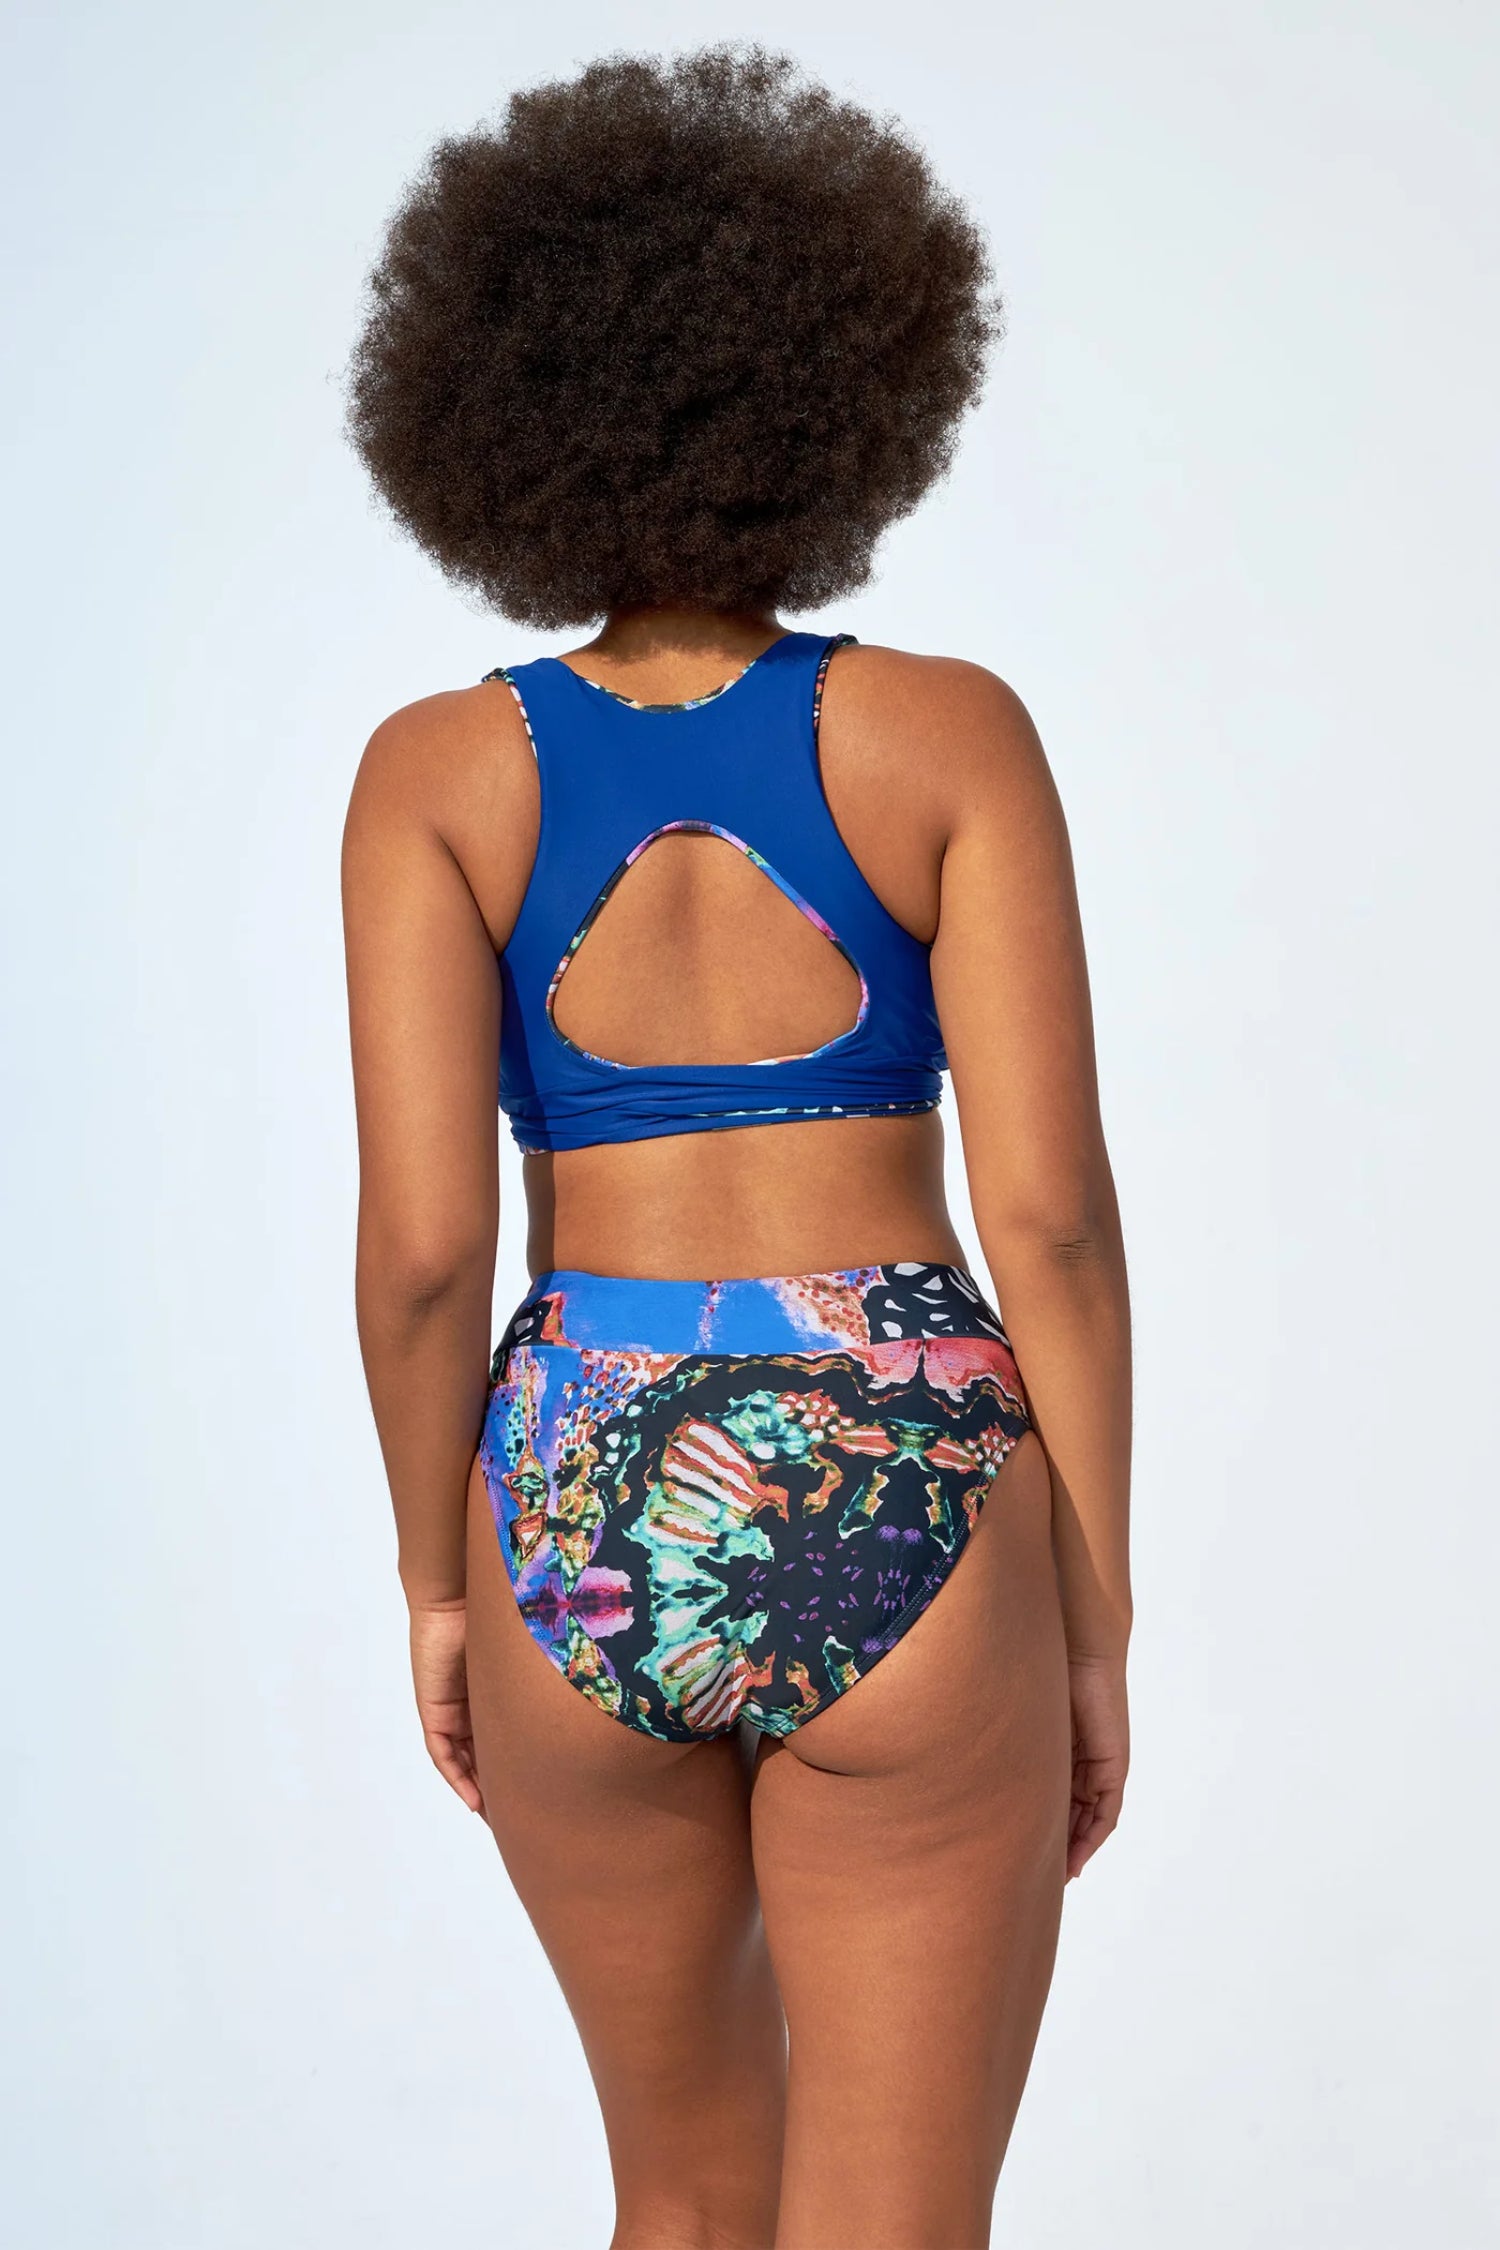 Analie HIgh Waist Bikini Bottom by Selfish Swimwear, Oscar Print, back view, high waist, high cut leg, fully lined, recycled fibres, UV protection, sizes XS to XXL, made in Montreal